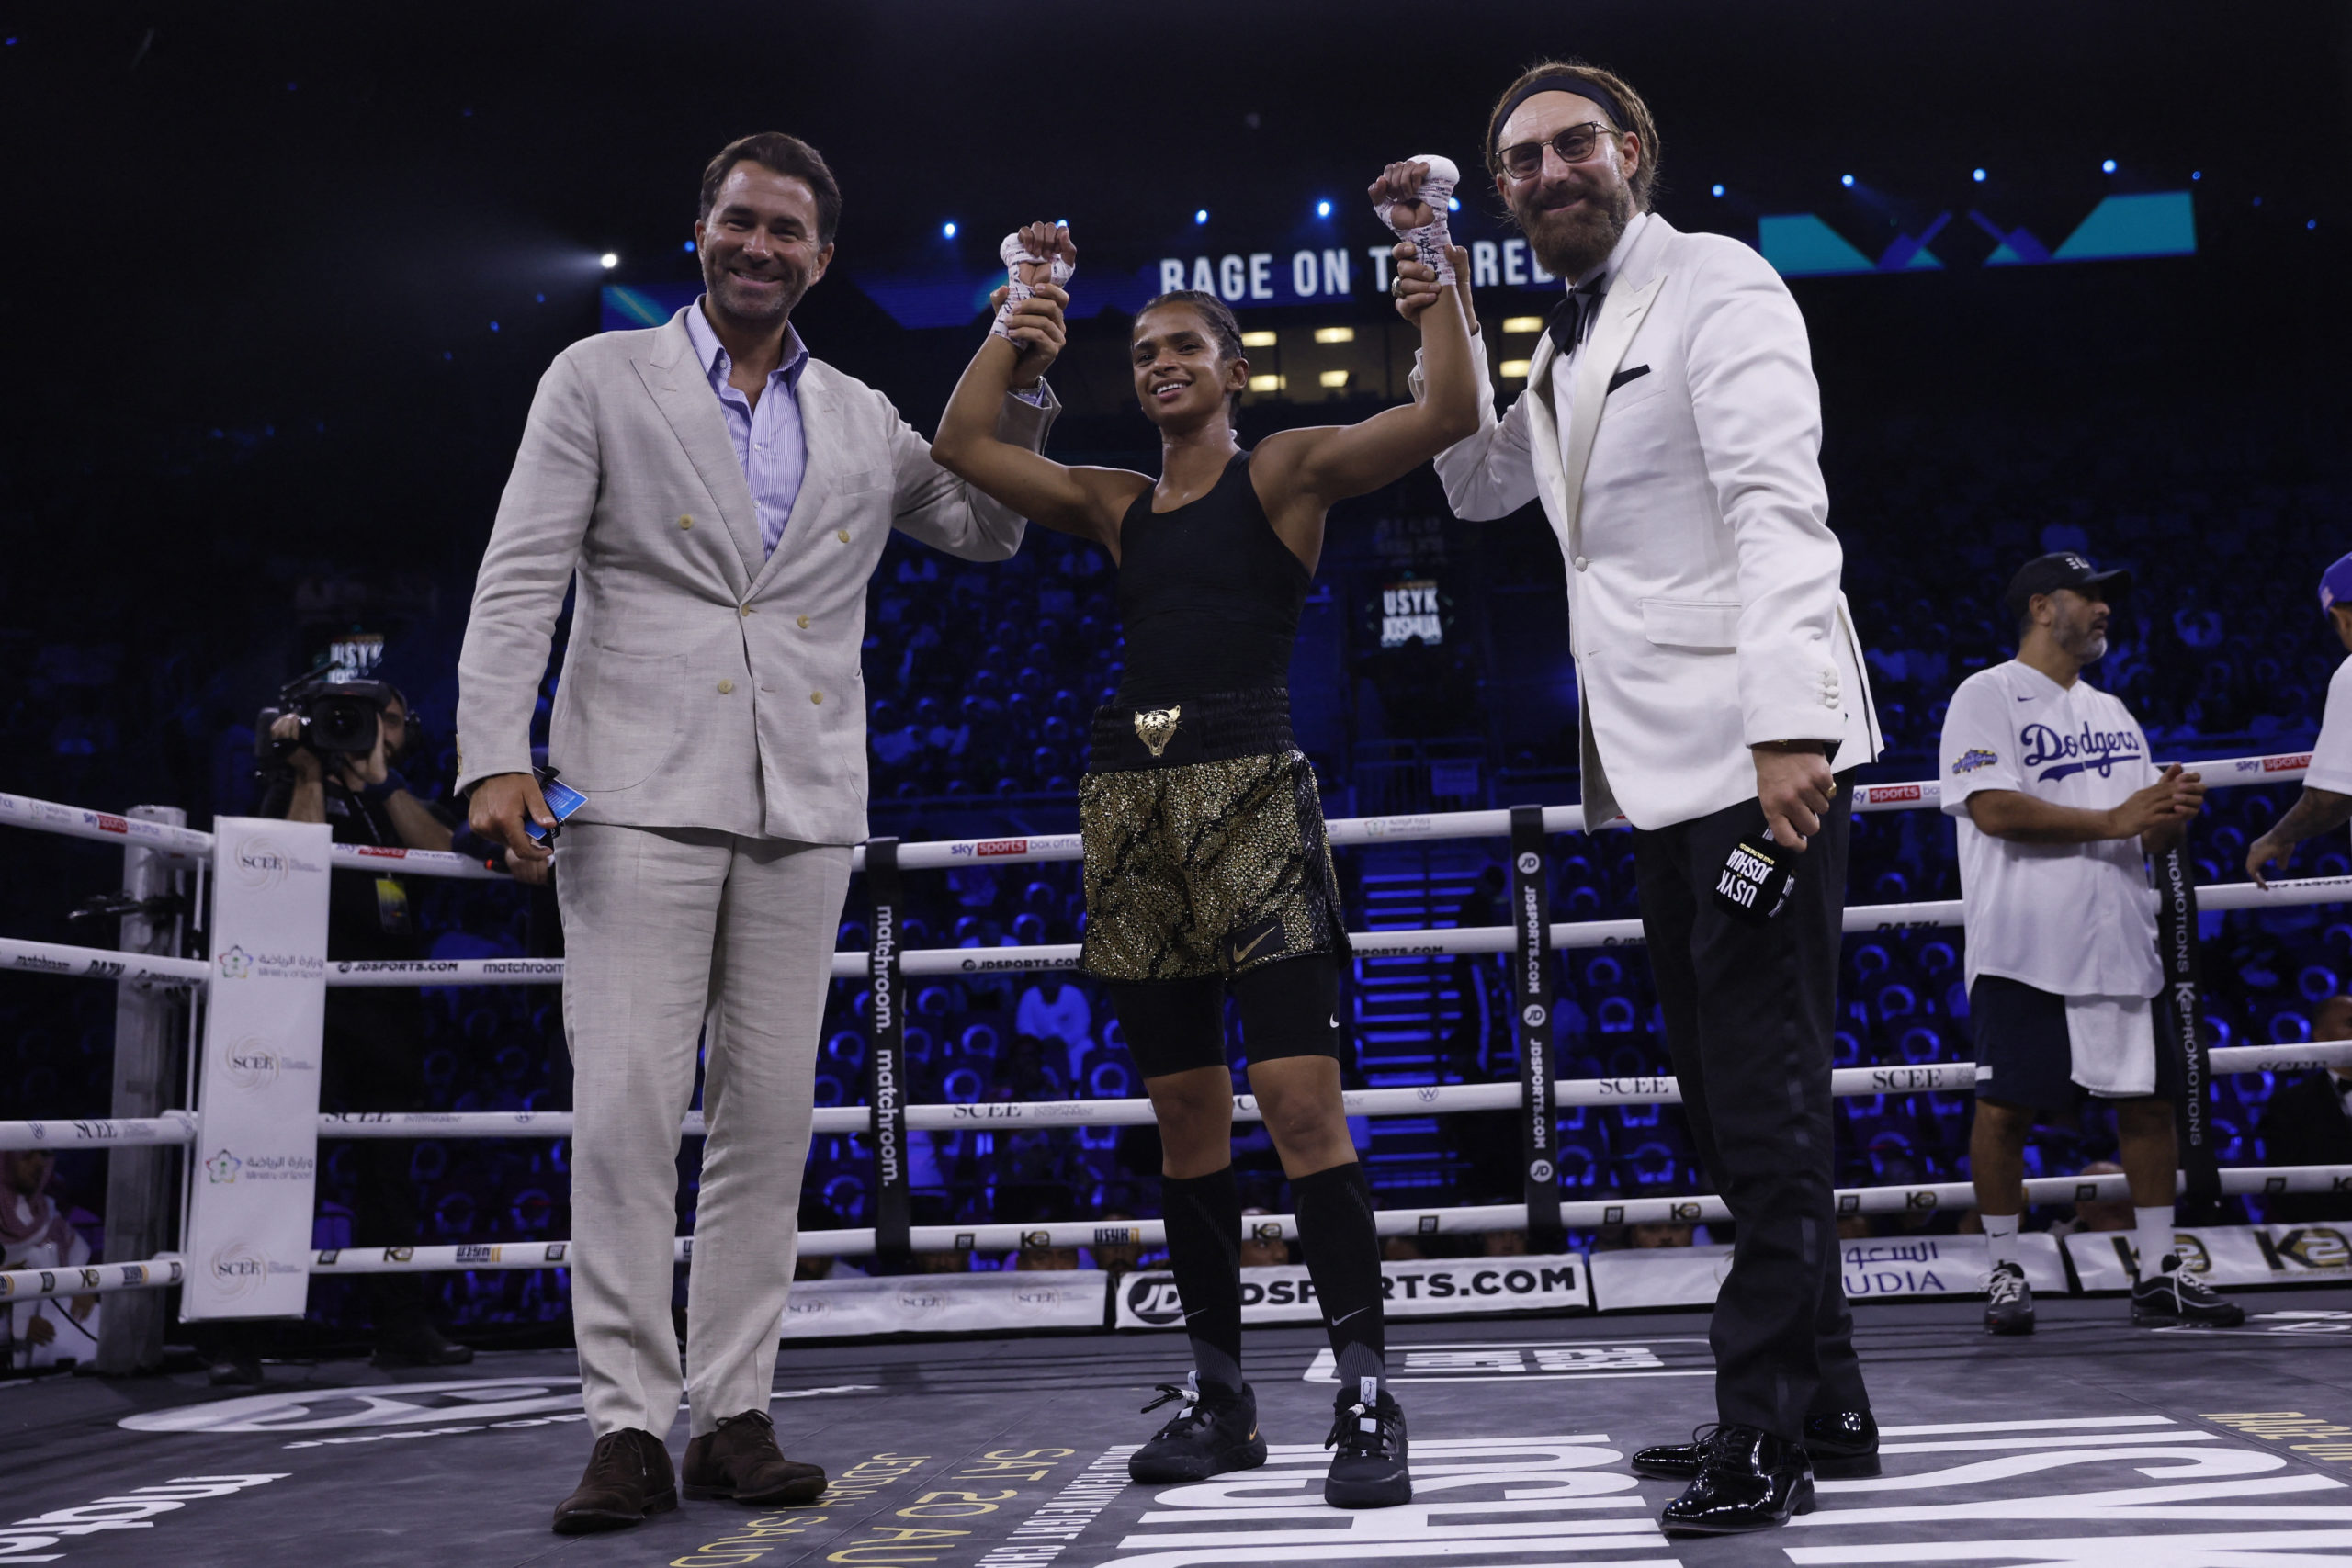 Ali takes only a minute to win first female pro fight in Saudi Arabia